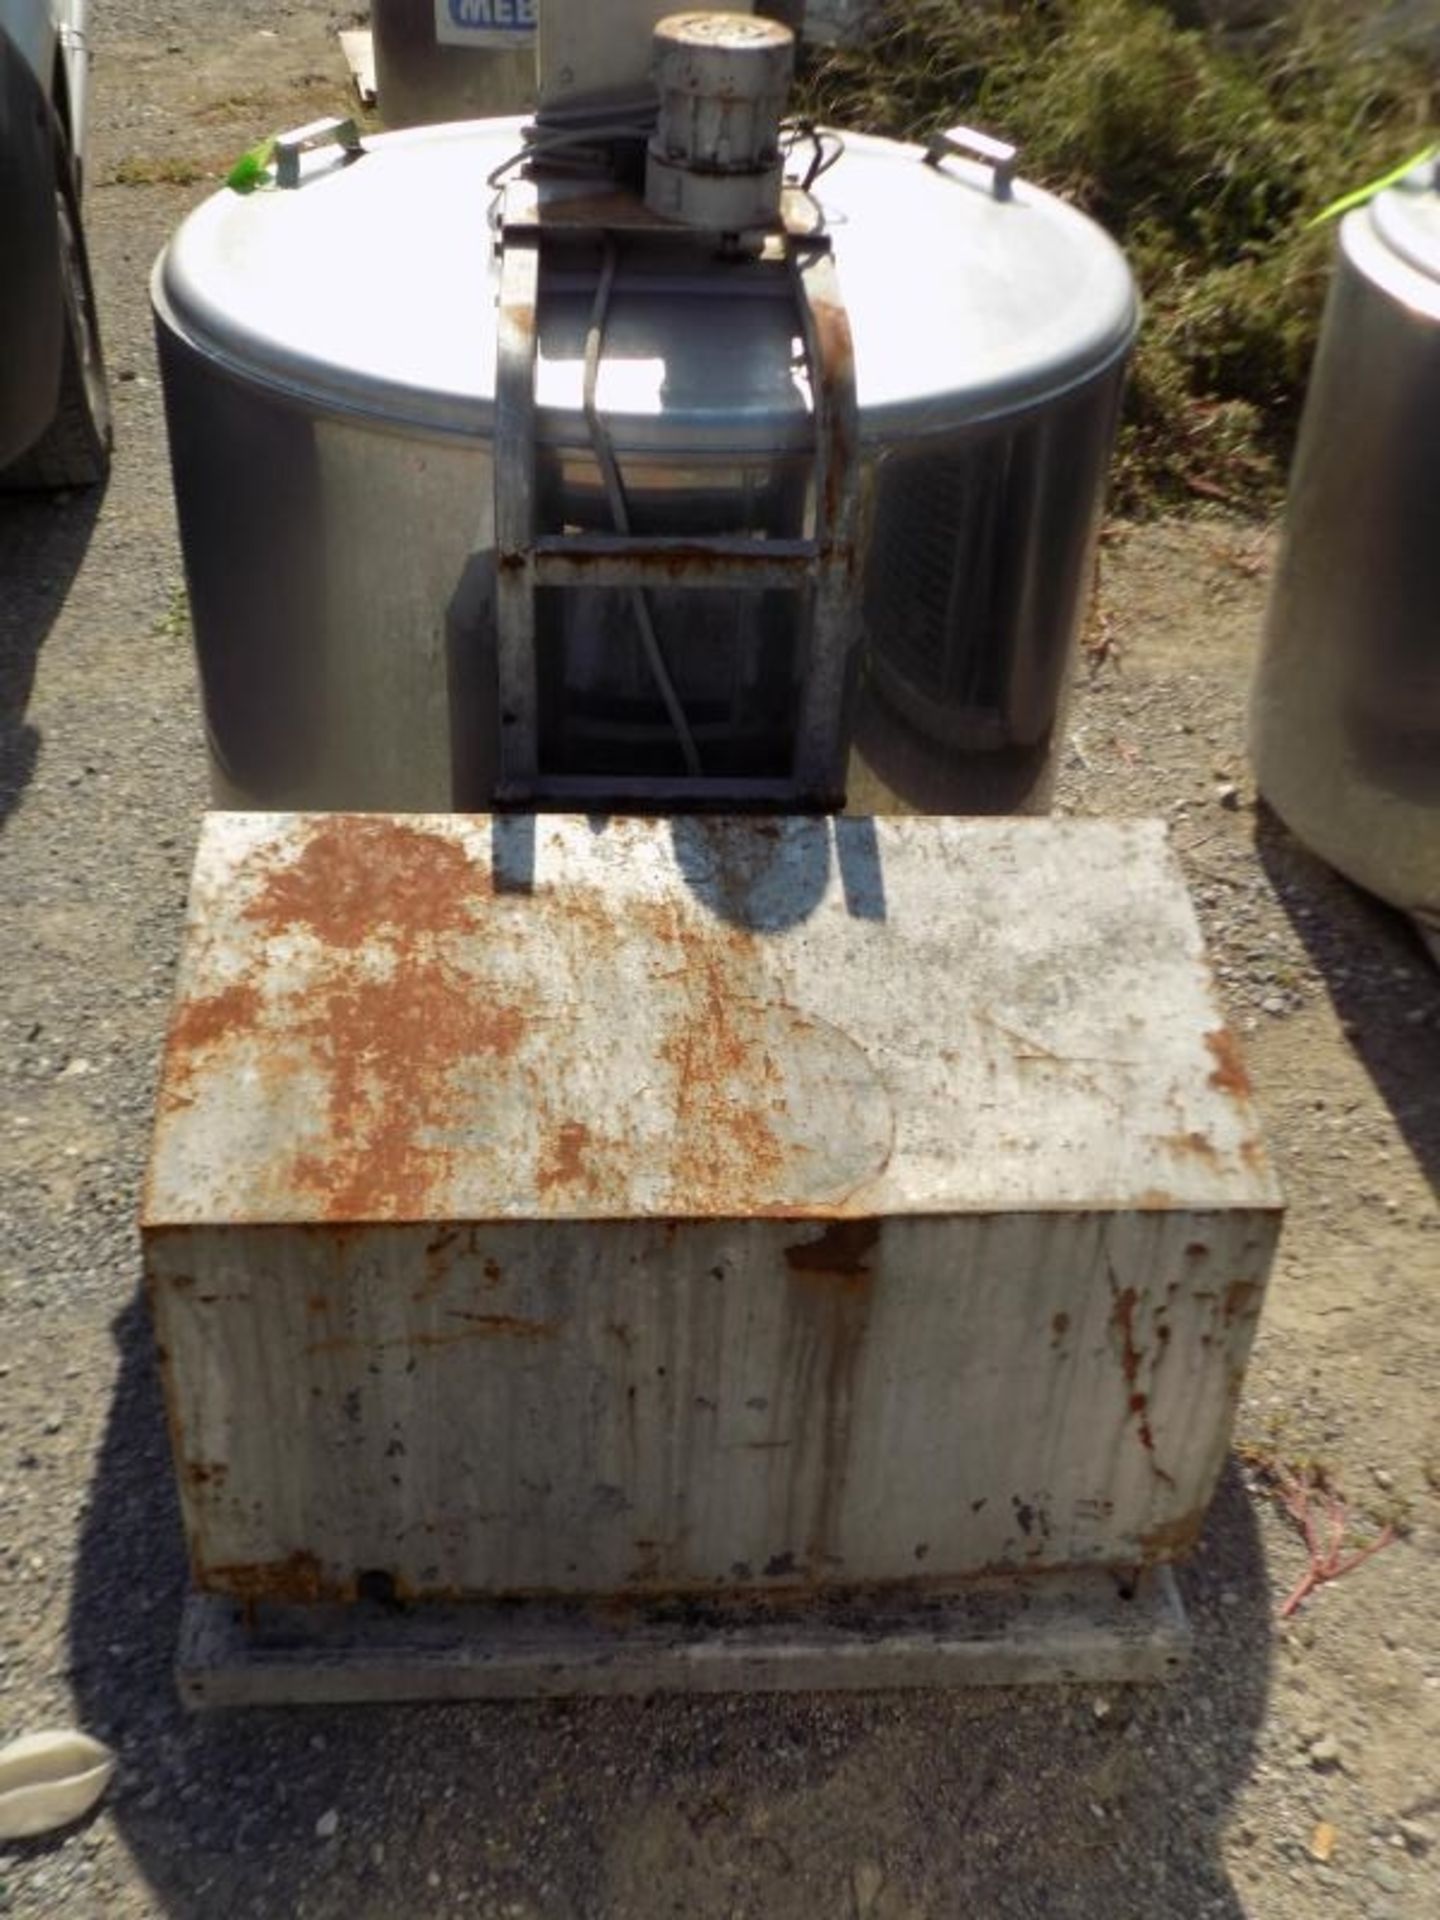 Japy Aprox. 320 L/85 Gal. Jacketed S/S Farm Tank with Hinged Lid, Twin Blade Prop, Motor with - Image 4 of 4